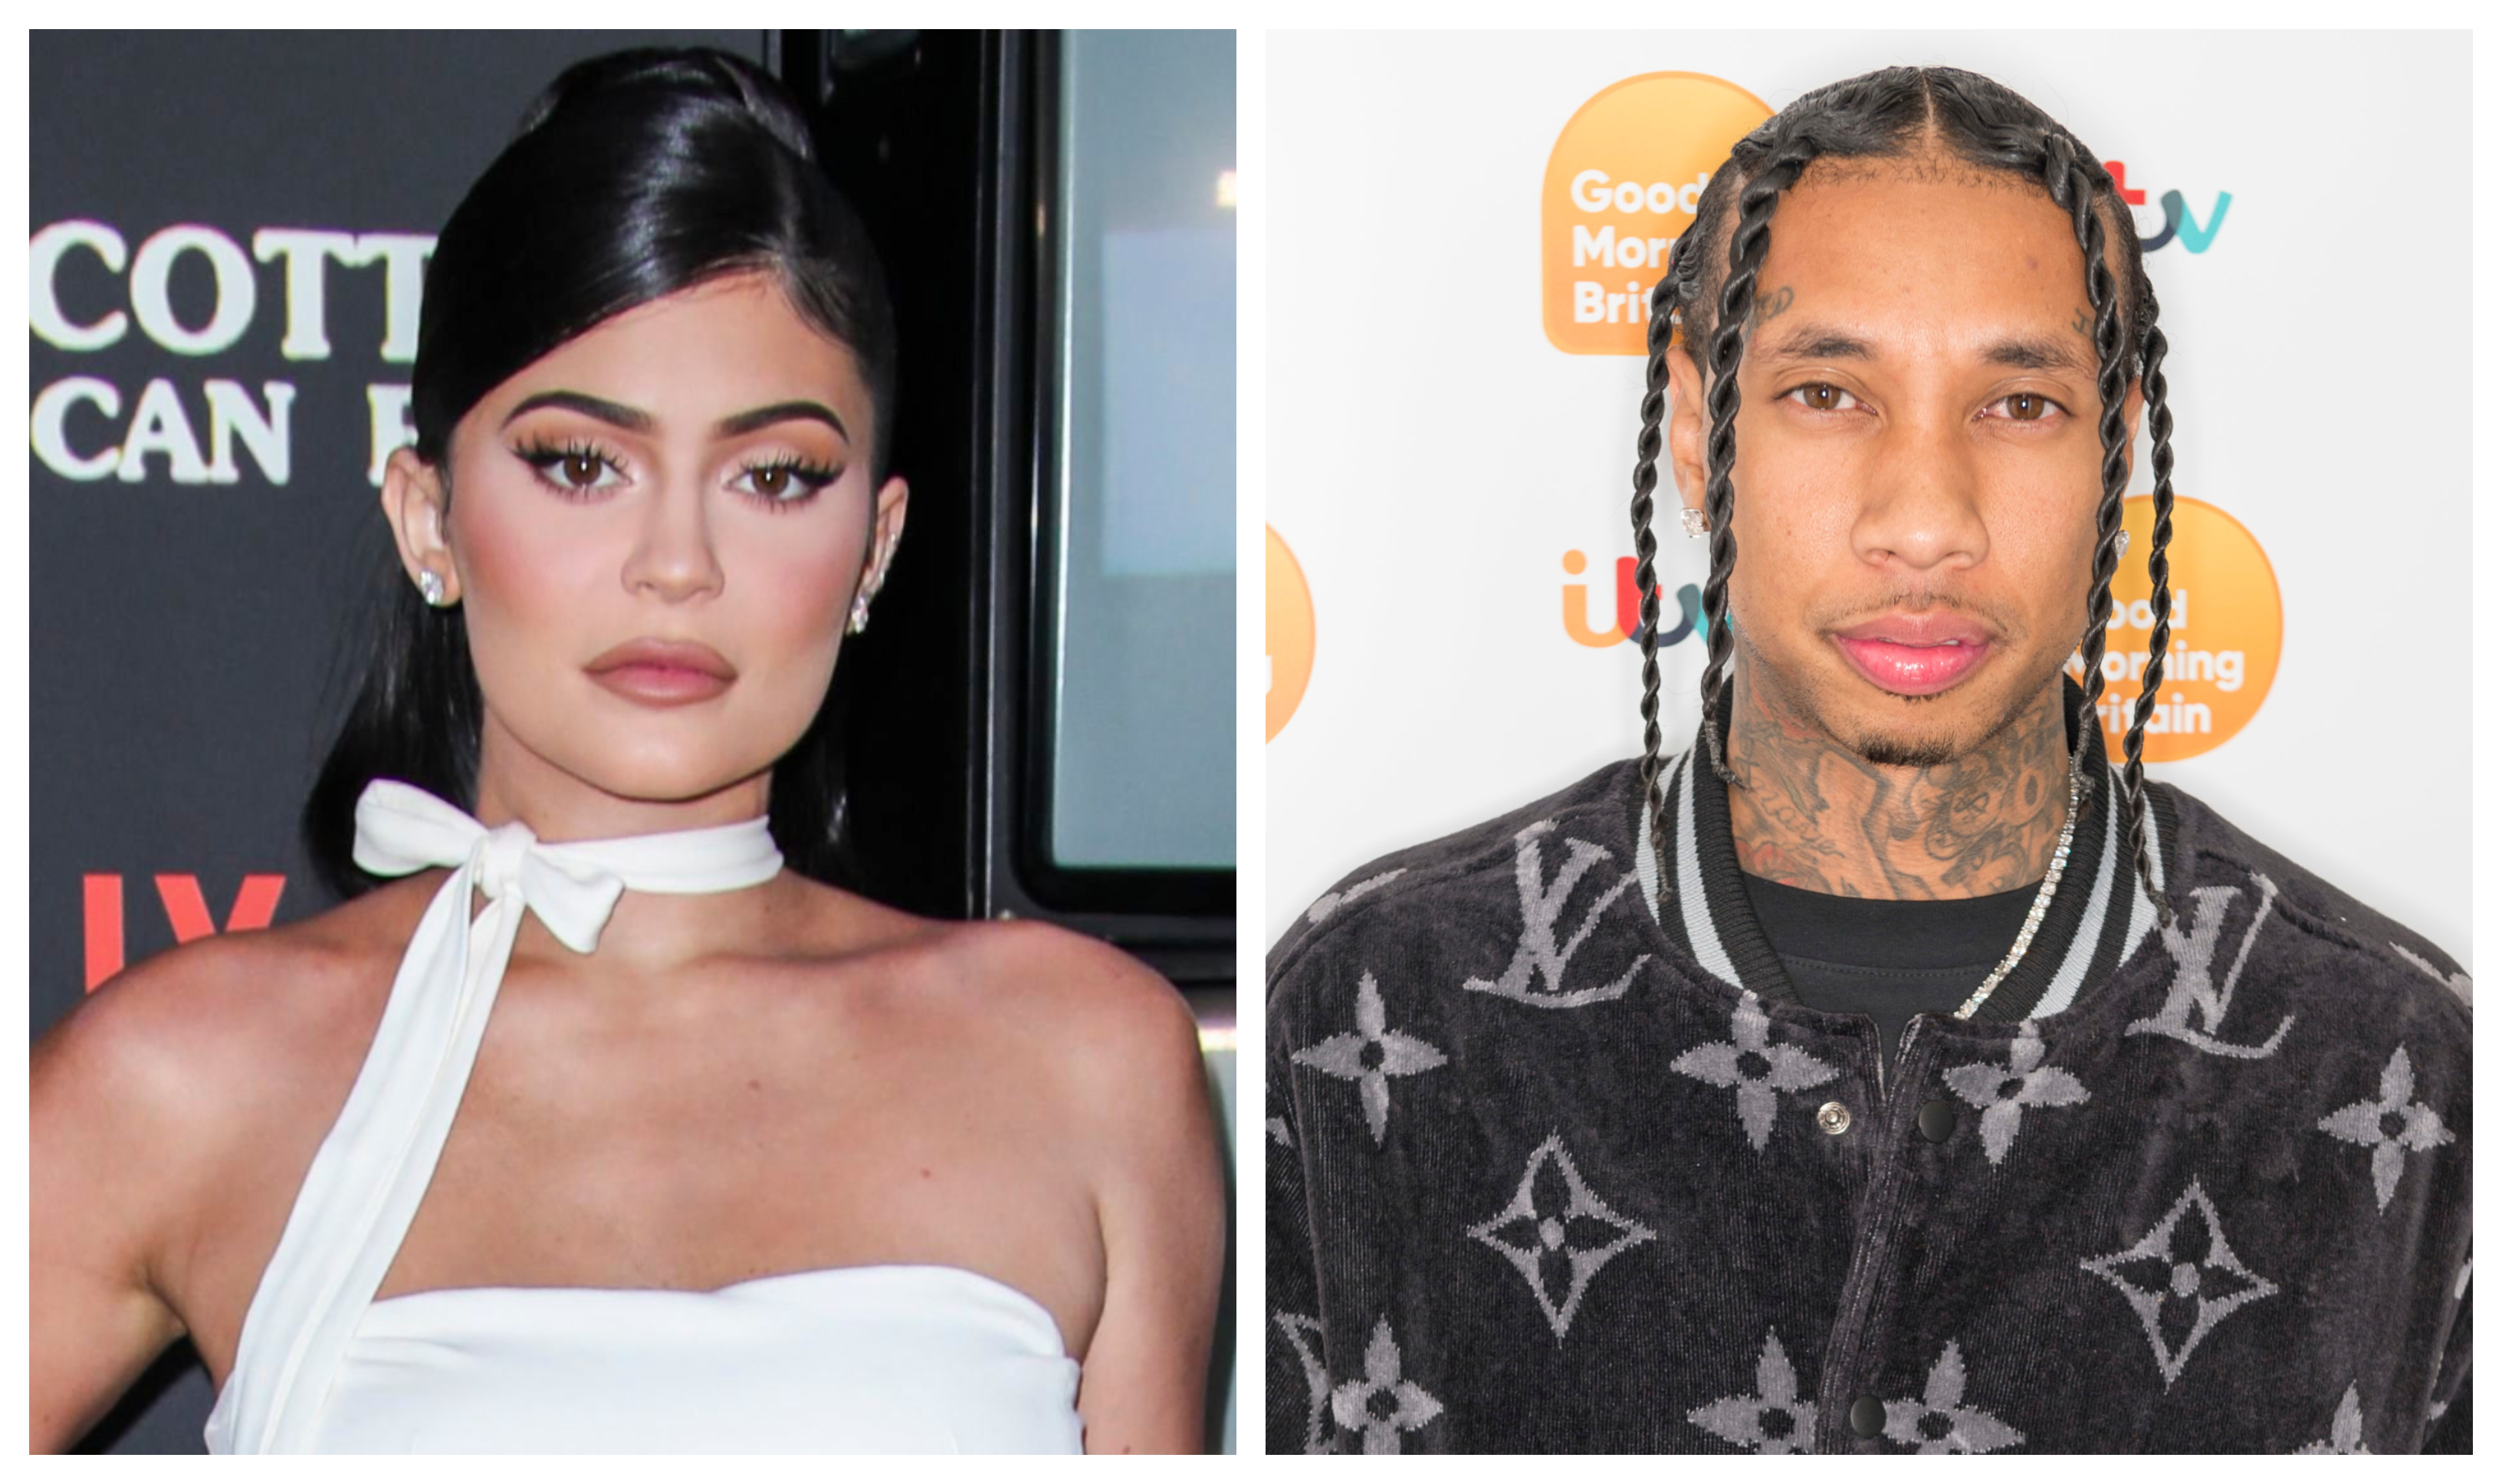 Kylie Jenner And Ex Boyfriend Tyga Spotted Hanging Out In Las Vegas